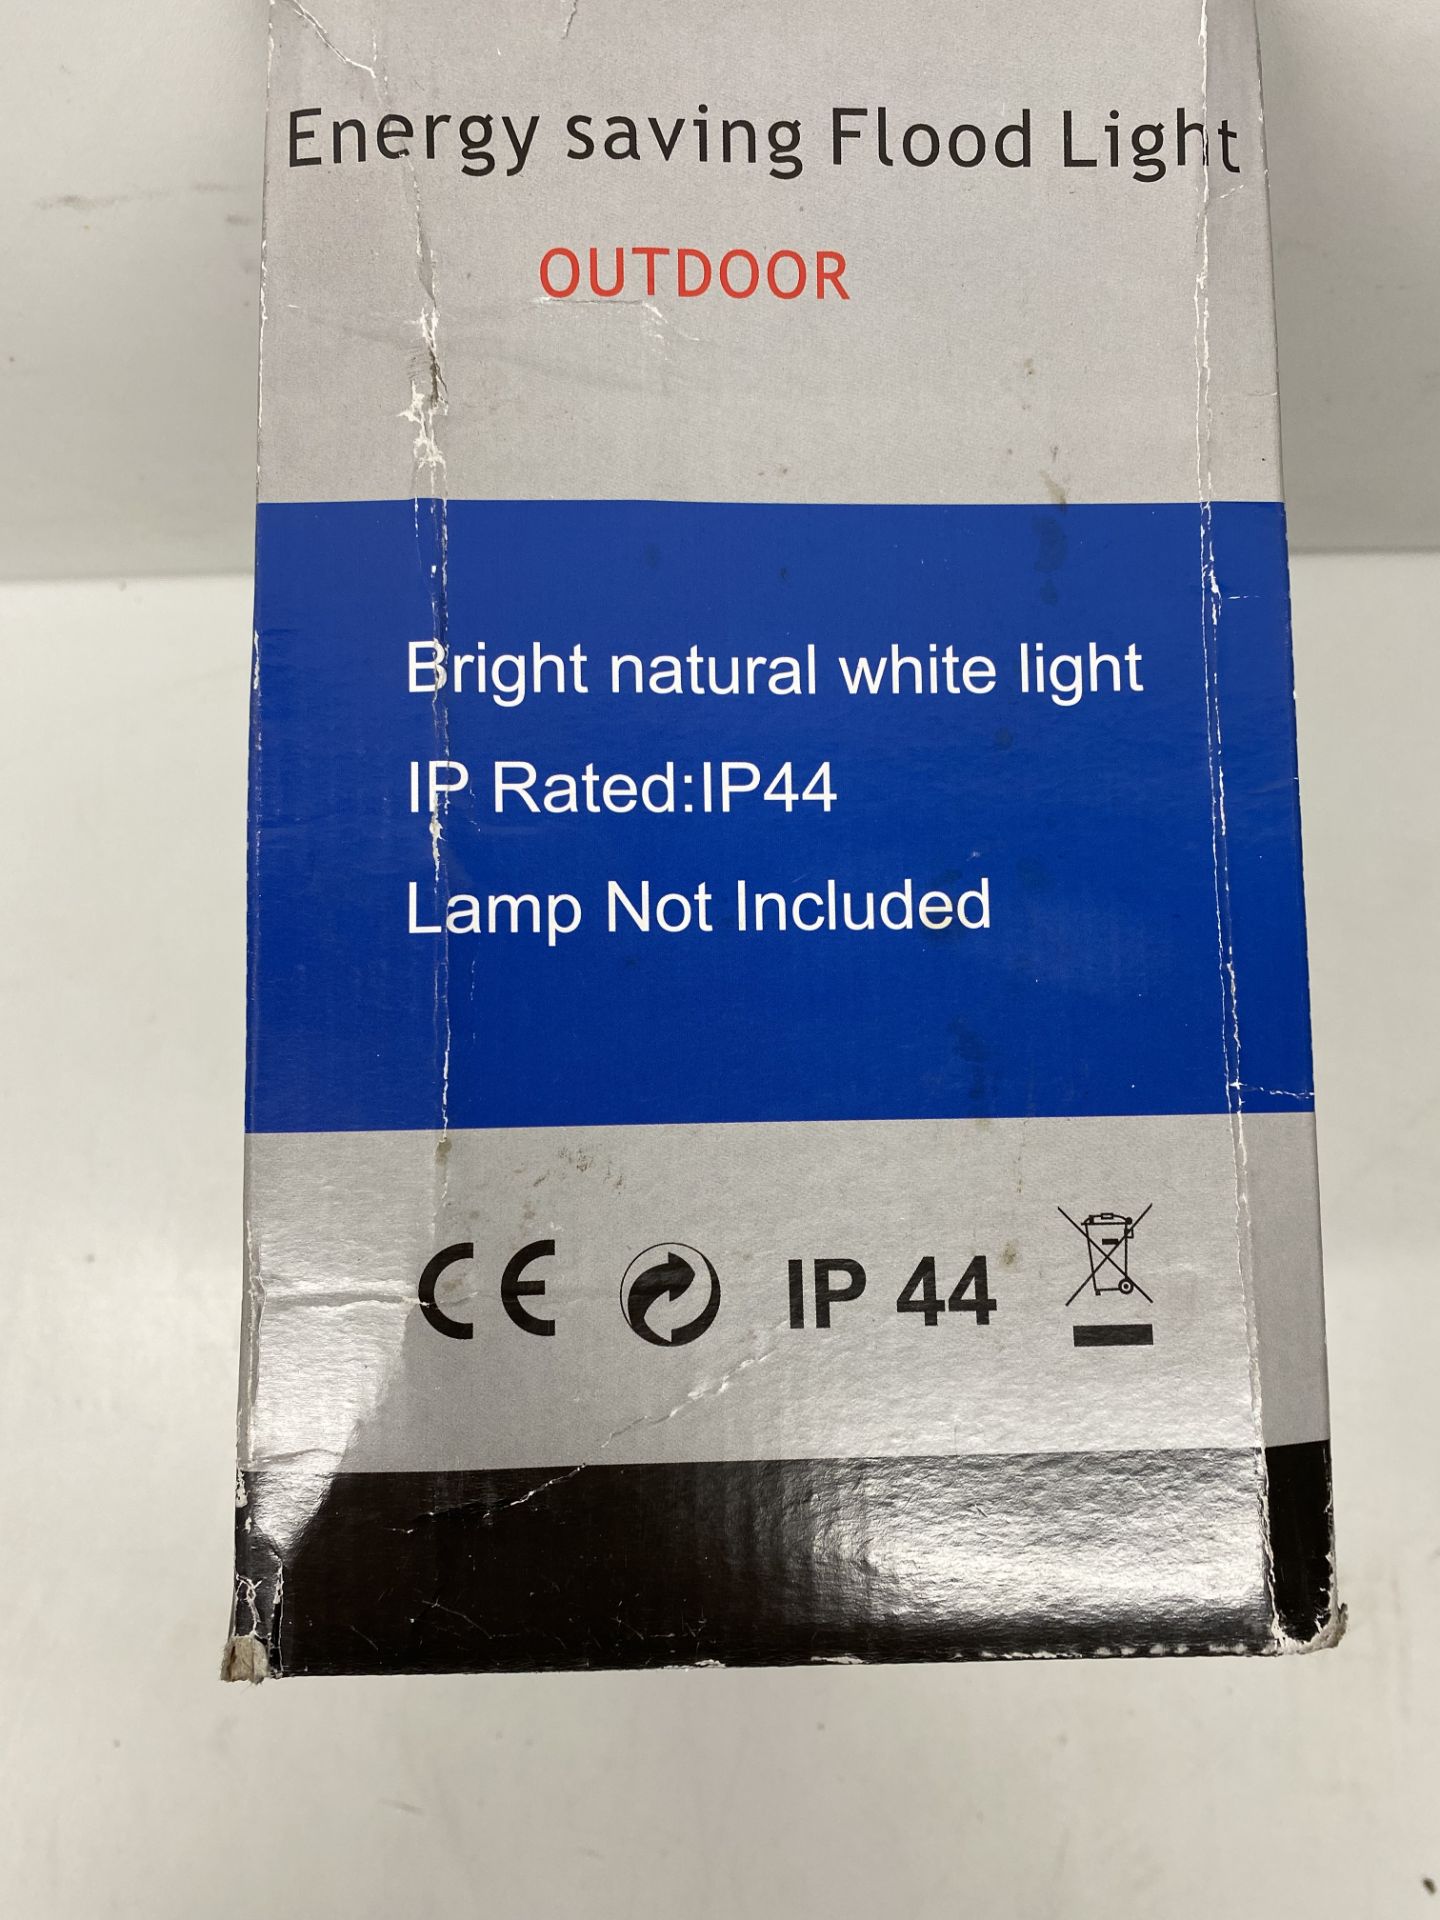 2 x Lamp Save Energy Saving Outdoor Flood Light,18w, Lamp Not Included - Image 4 of 4